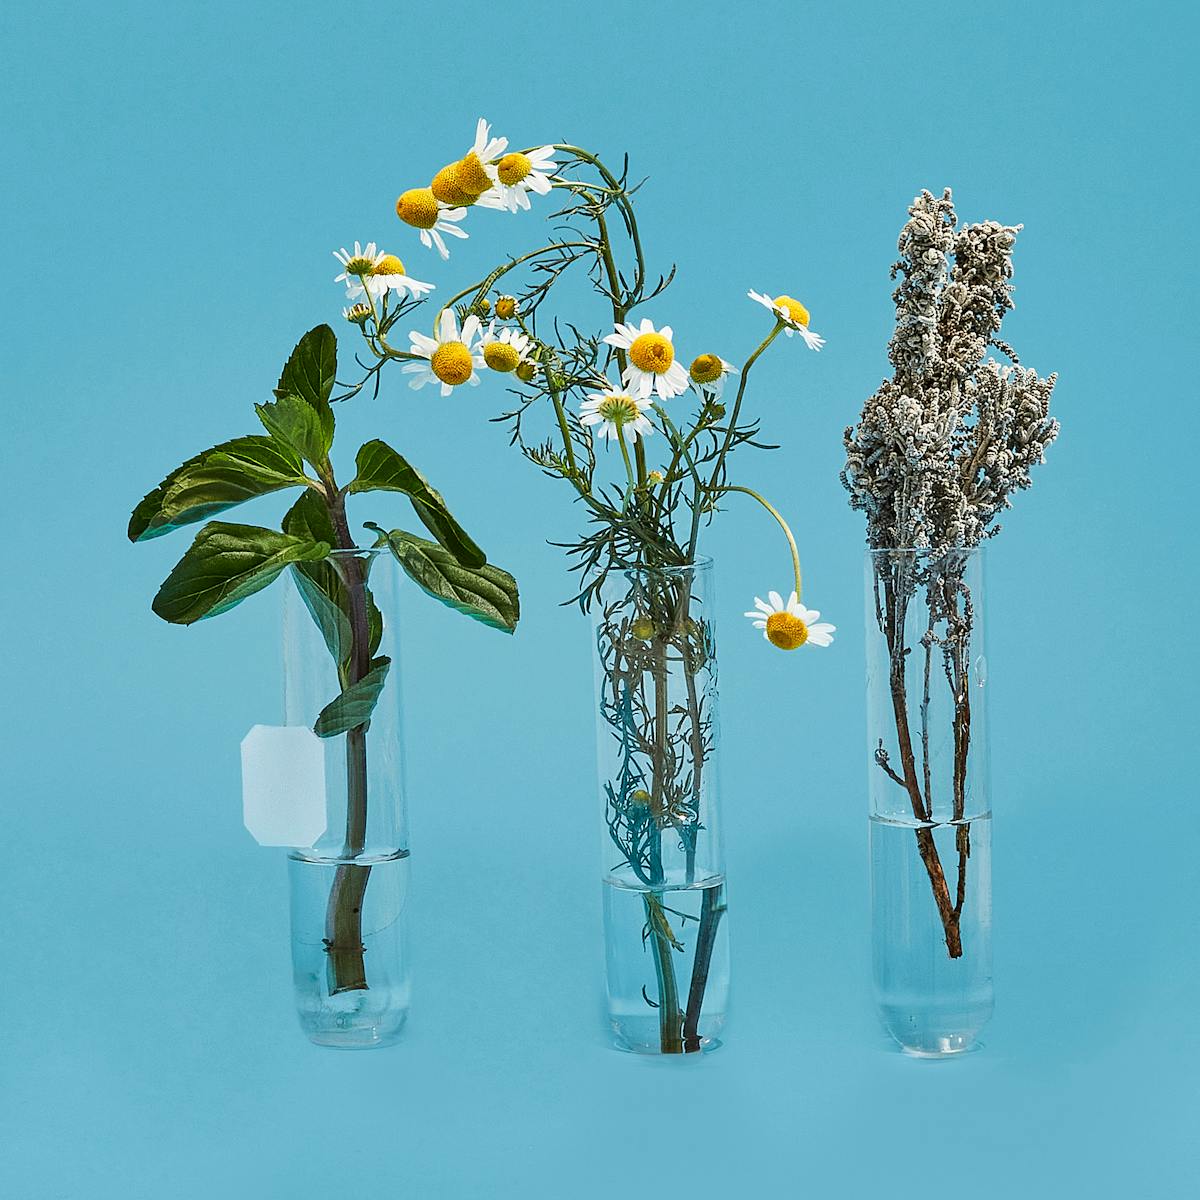 Photograph of three glass test tubes lined up on a bright blue background. Each test tube has a different herb in it, their stems in a small amount of water and their leaves and flowers rising out of the top. In the left hand test tube is mint where there is also a tea bag string and paper tag hanging down. The centre test tube contain Camomile with its bright white and yellow flowers and the right hand test tube contains a herb with a tight knit form.